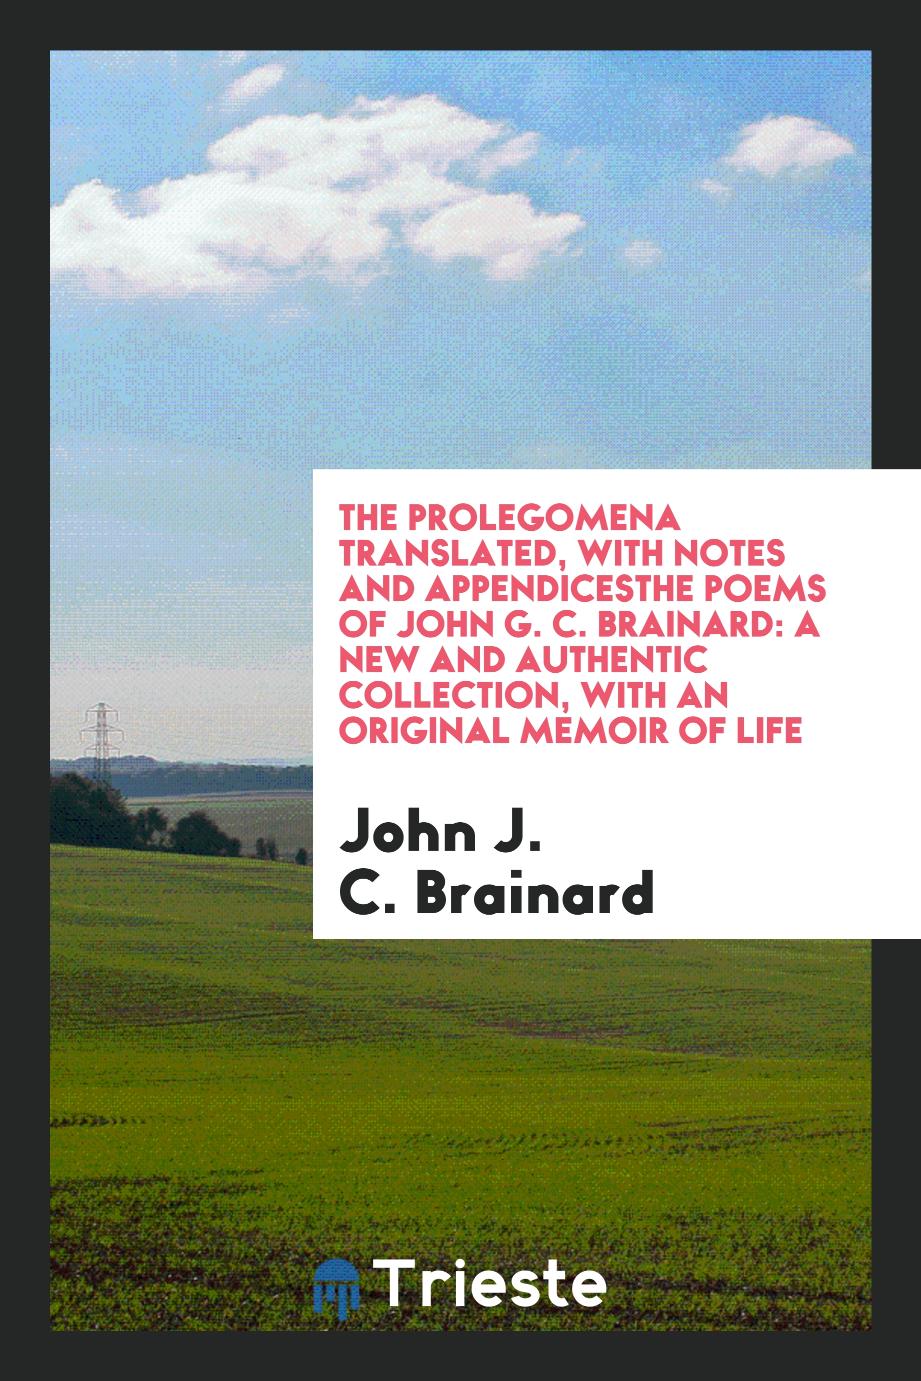 The Prolegomena Translated, with Notes and AppendicesThe Poems of John G. C. Brainard: A New and Authentic Collection, with an Original Memoir of Life